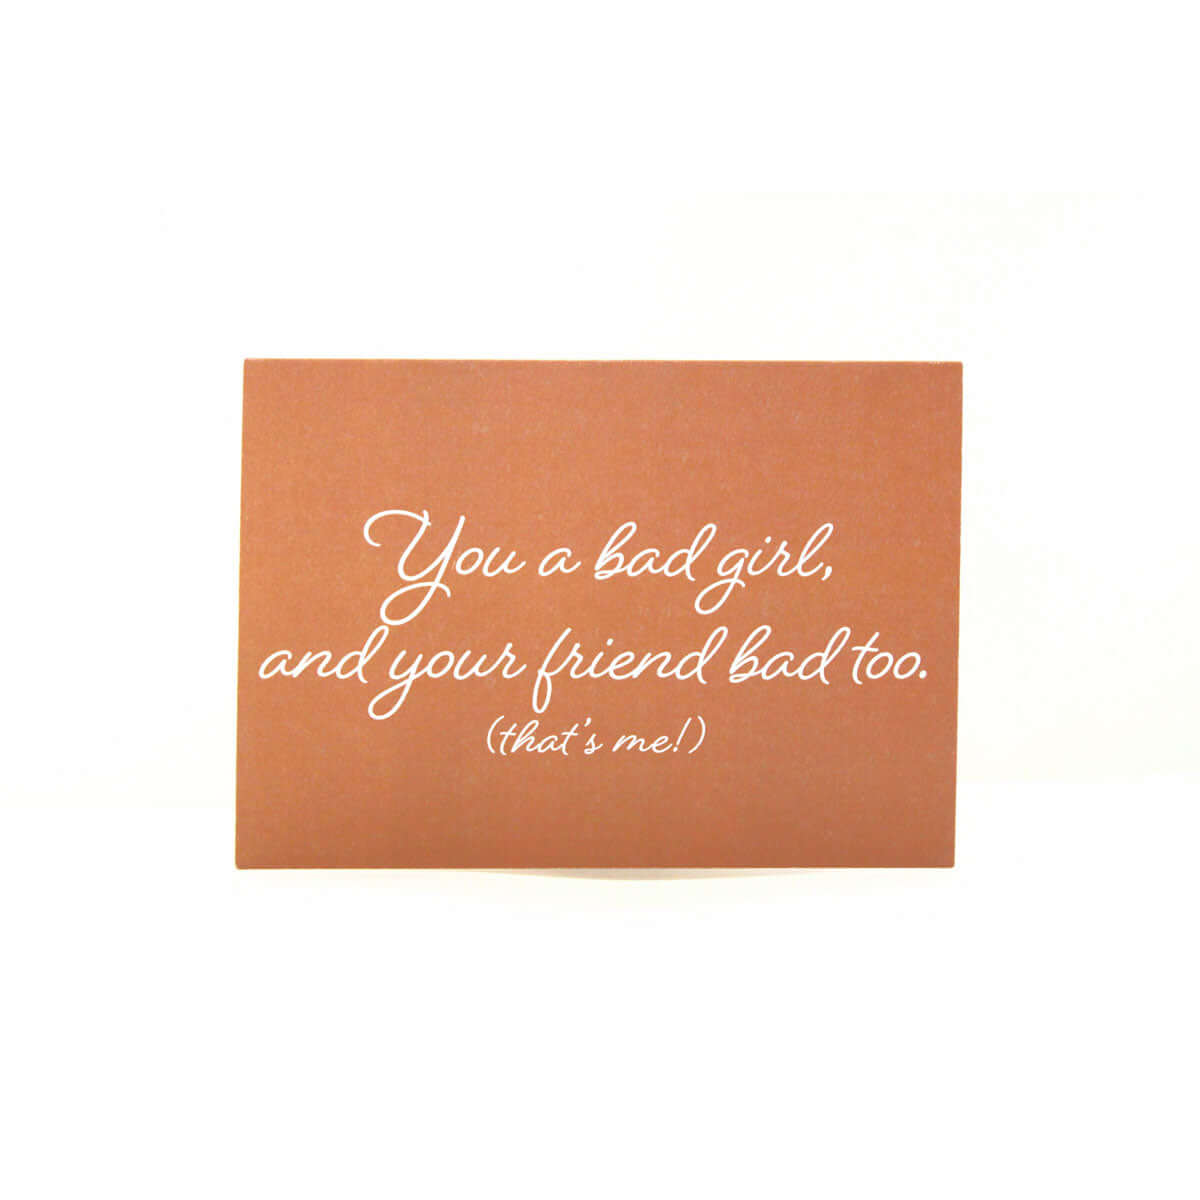 Orange card with a white cursive text that reads 'You a bad girl, and your friend bad too. (that's me!)"